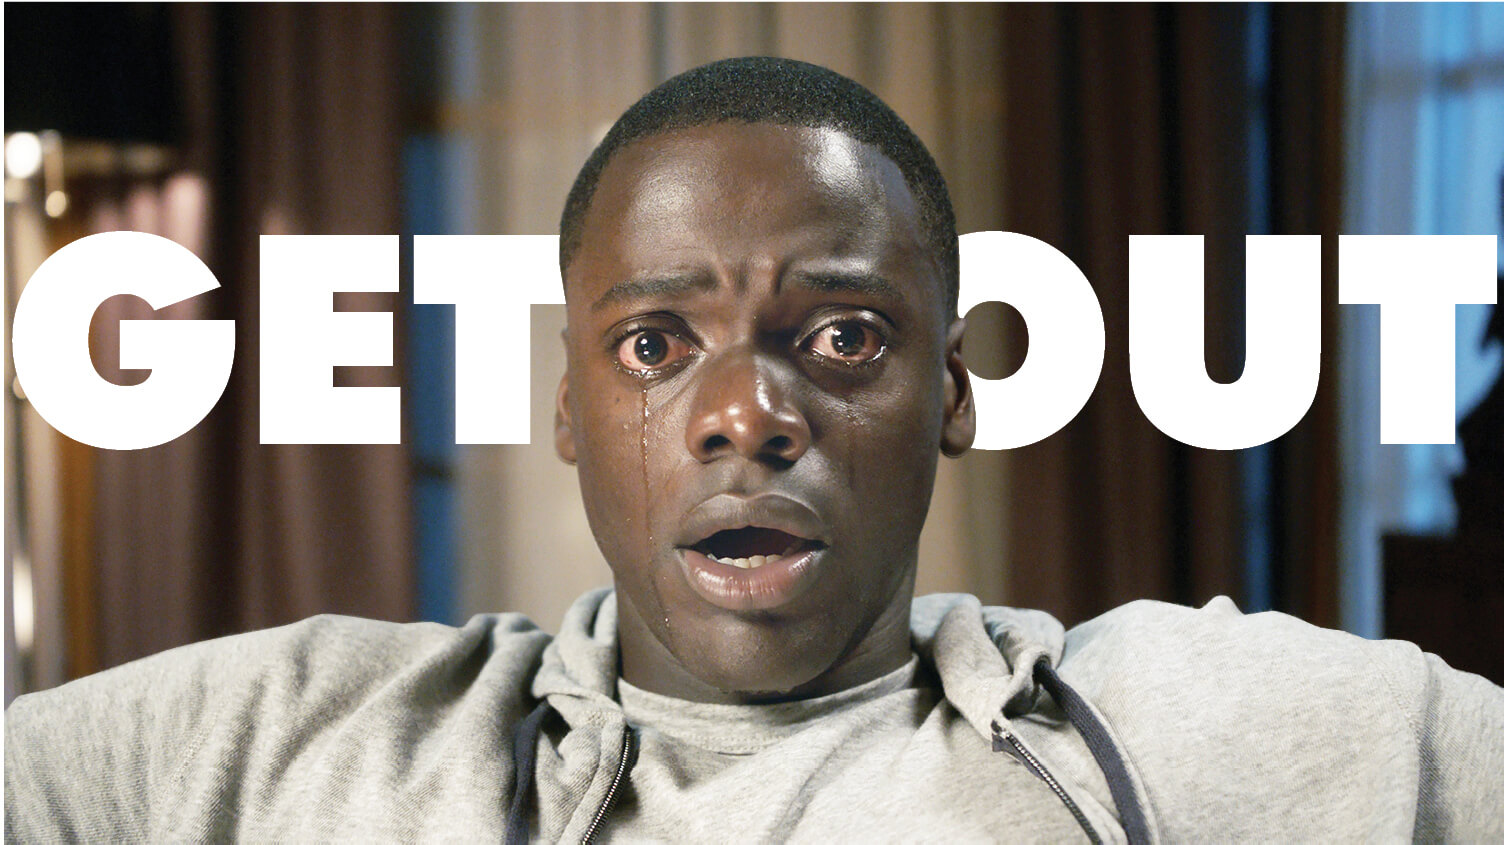 Get Out 2 ⓴⓴ Movie Poster, Cast, Release Date & More All Details